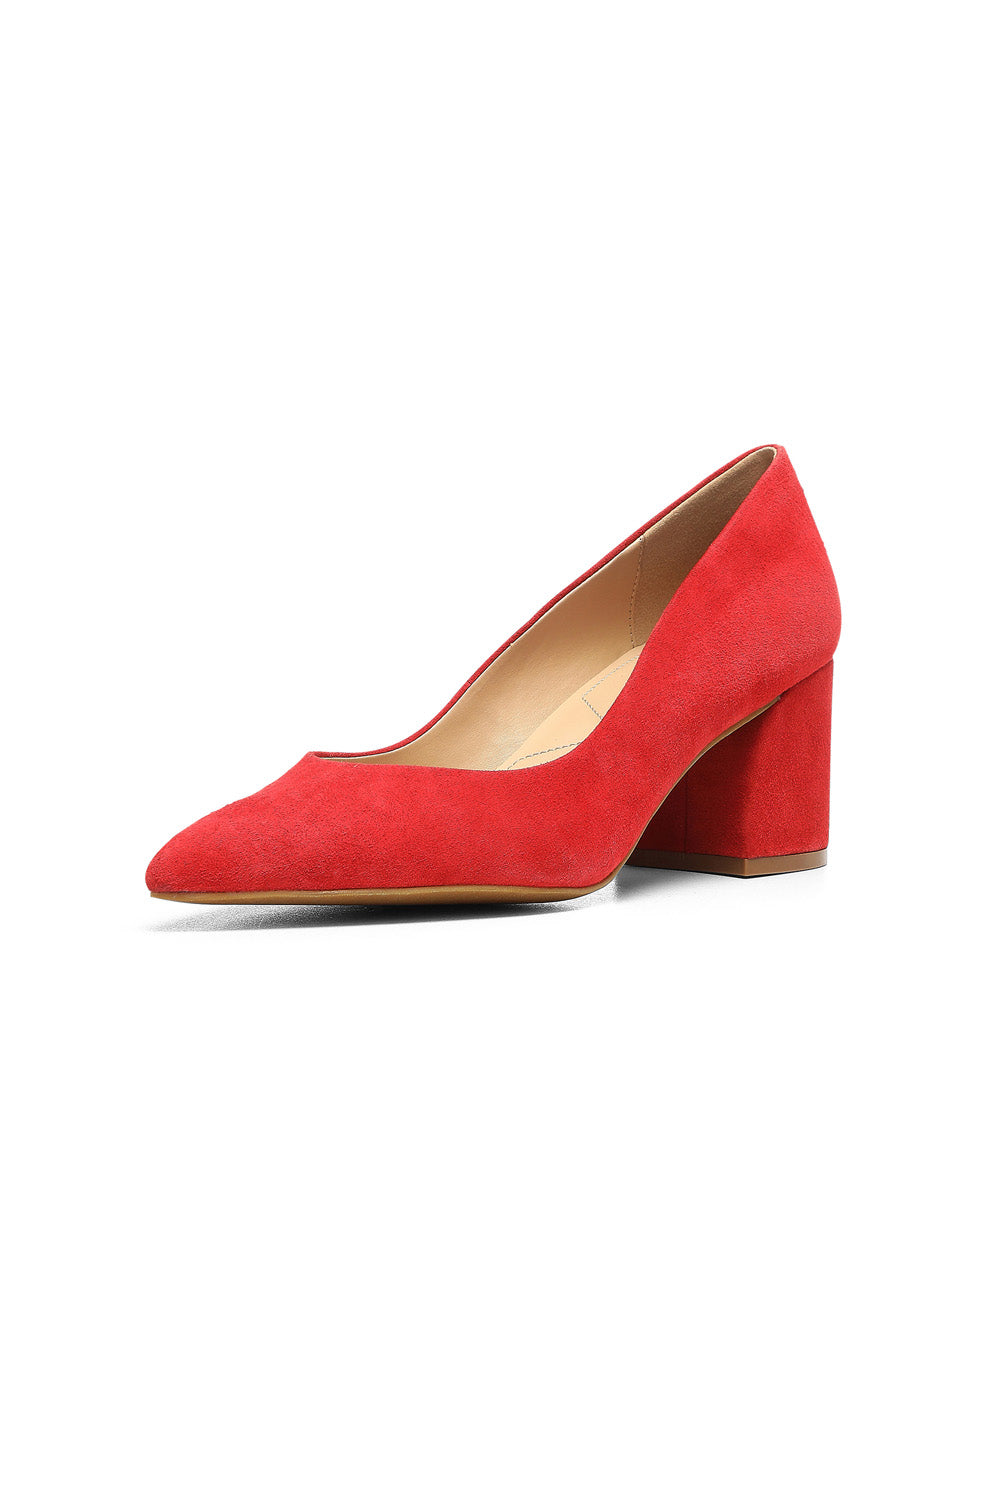 NYDJ Solima Pumps In Suede - Red